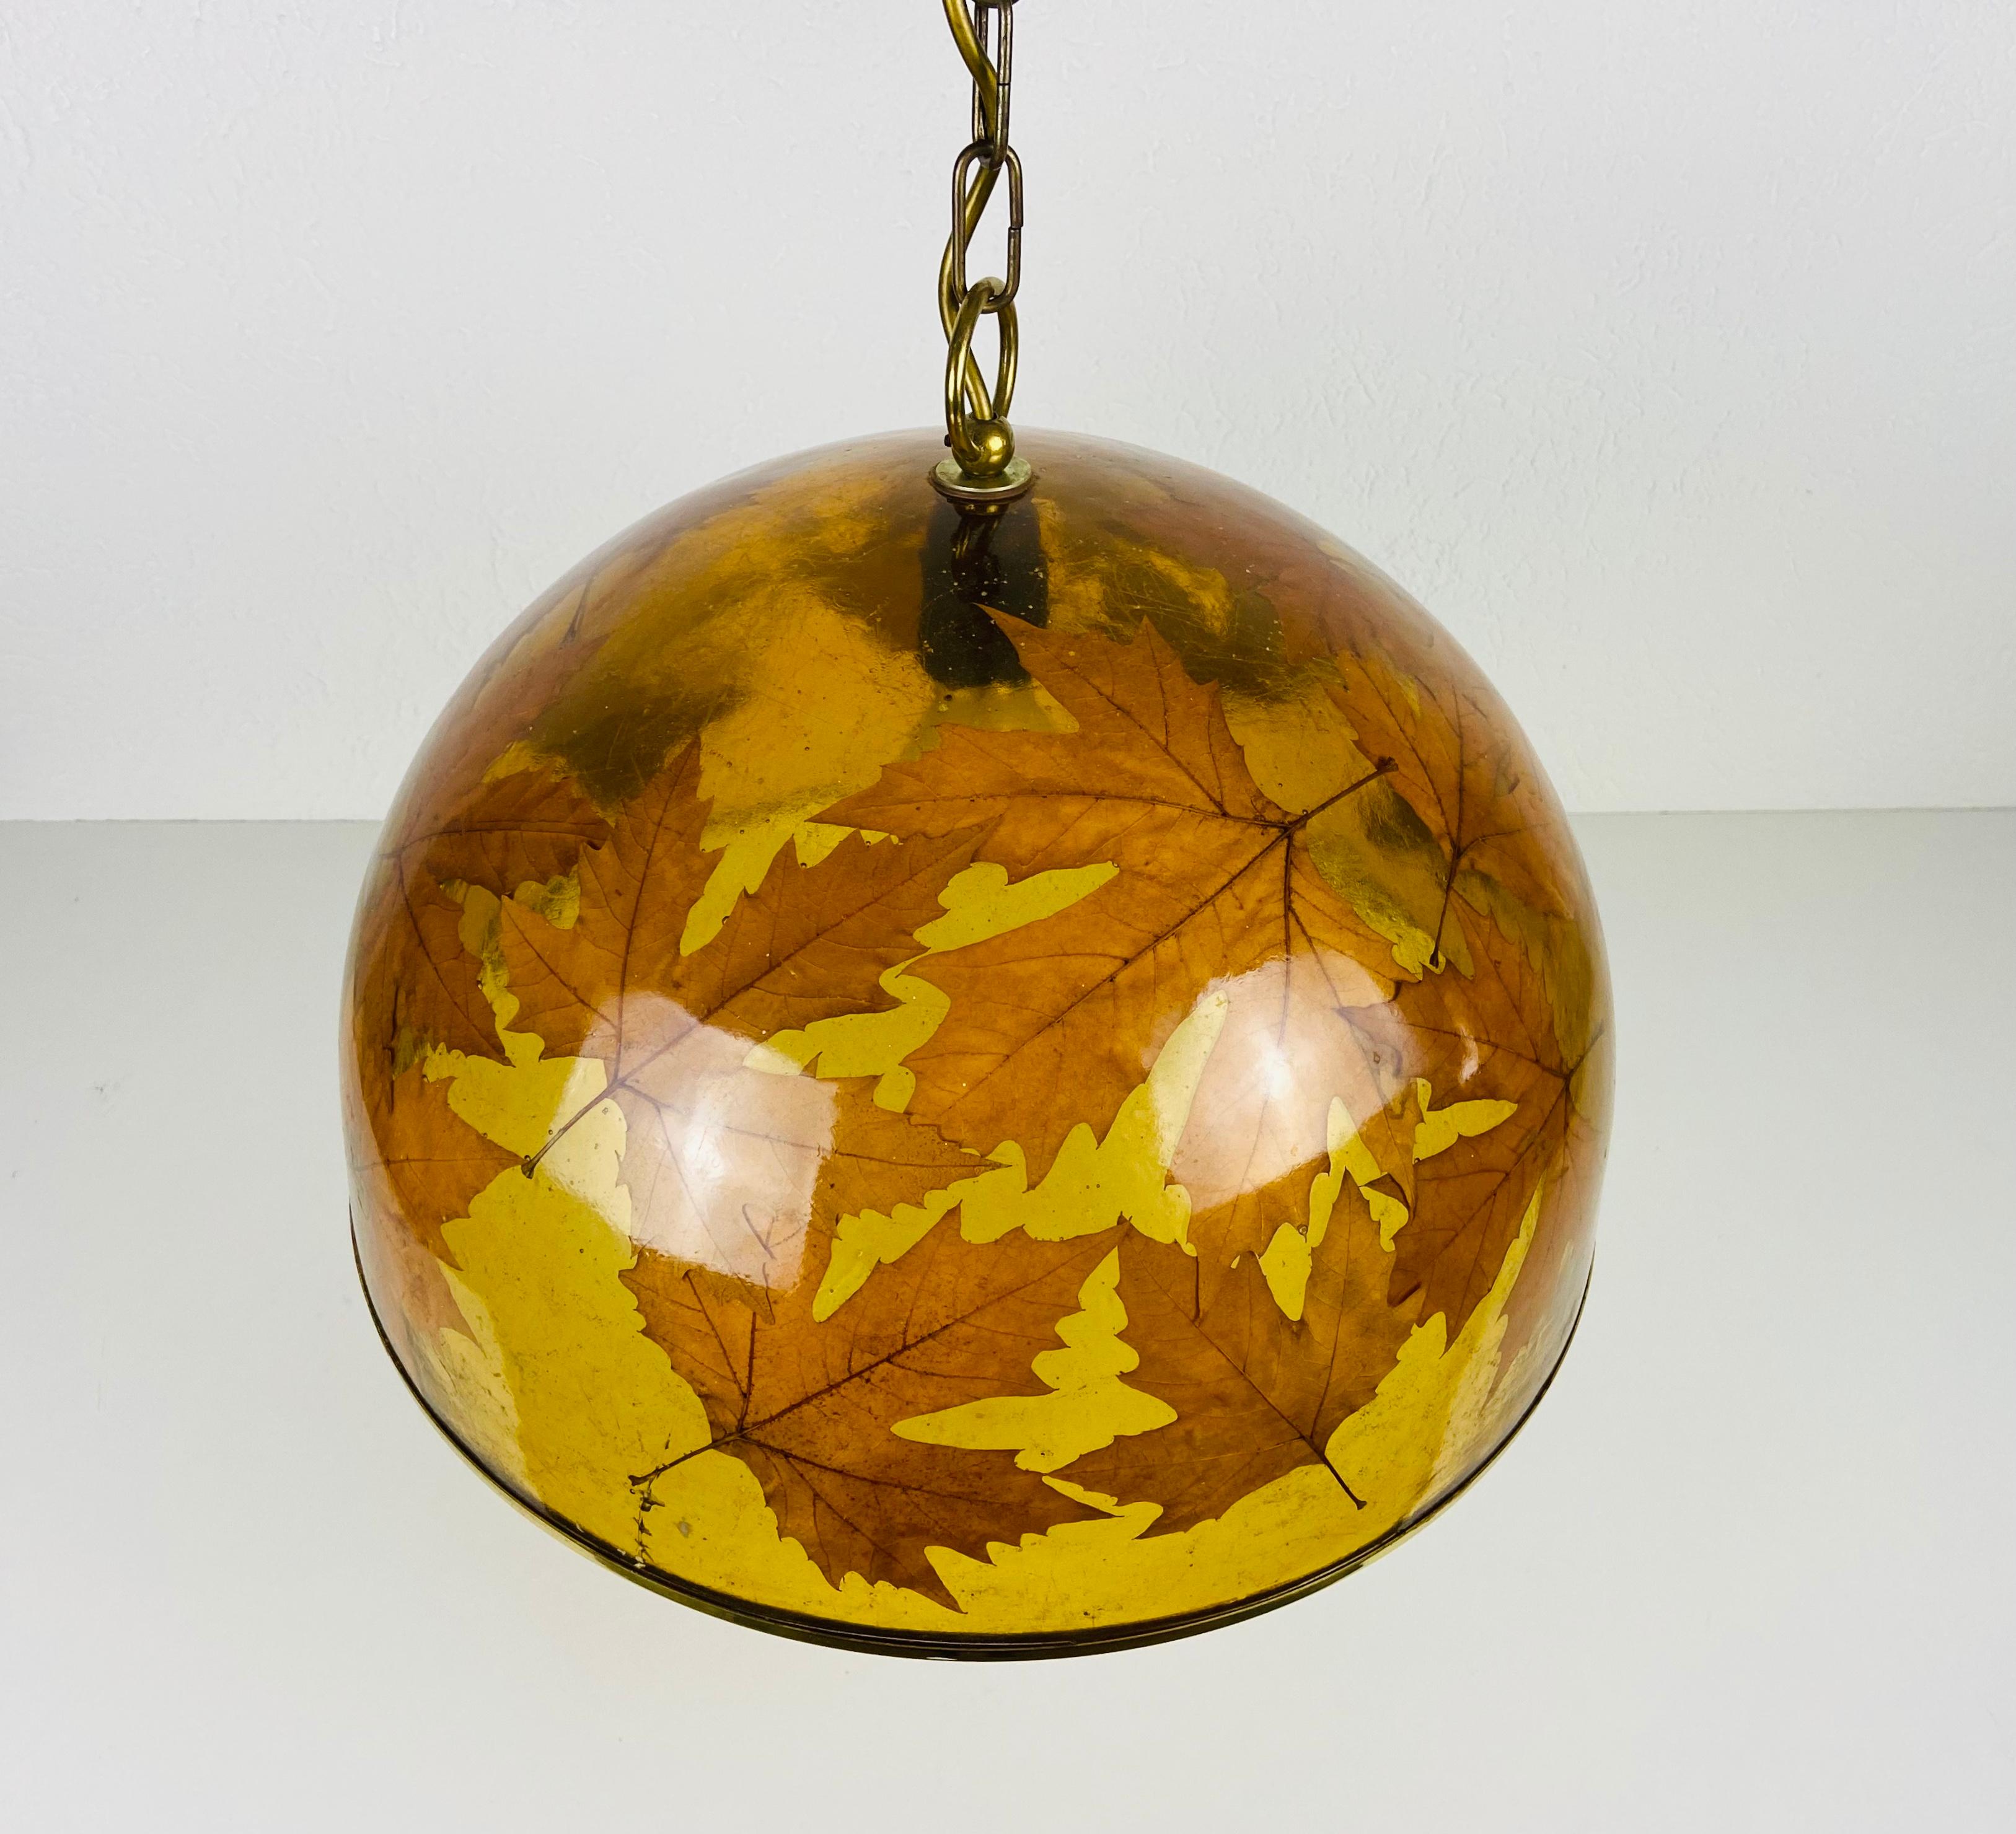 Plastic Midcentury Plexiglass Pendant Lamp with Real Leaves, Germany, 1960s For Sale